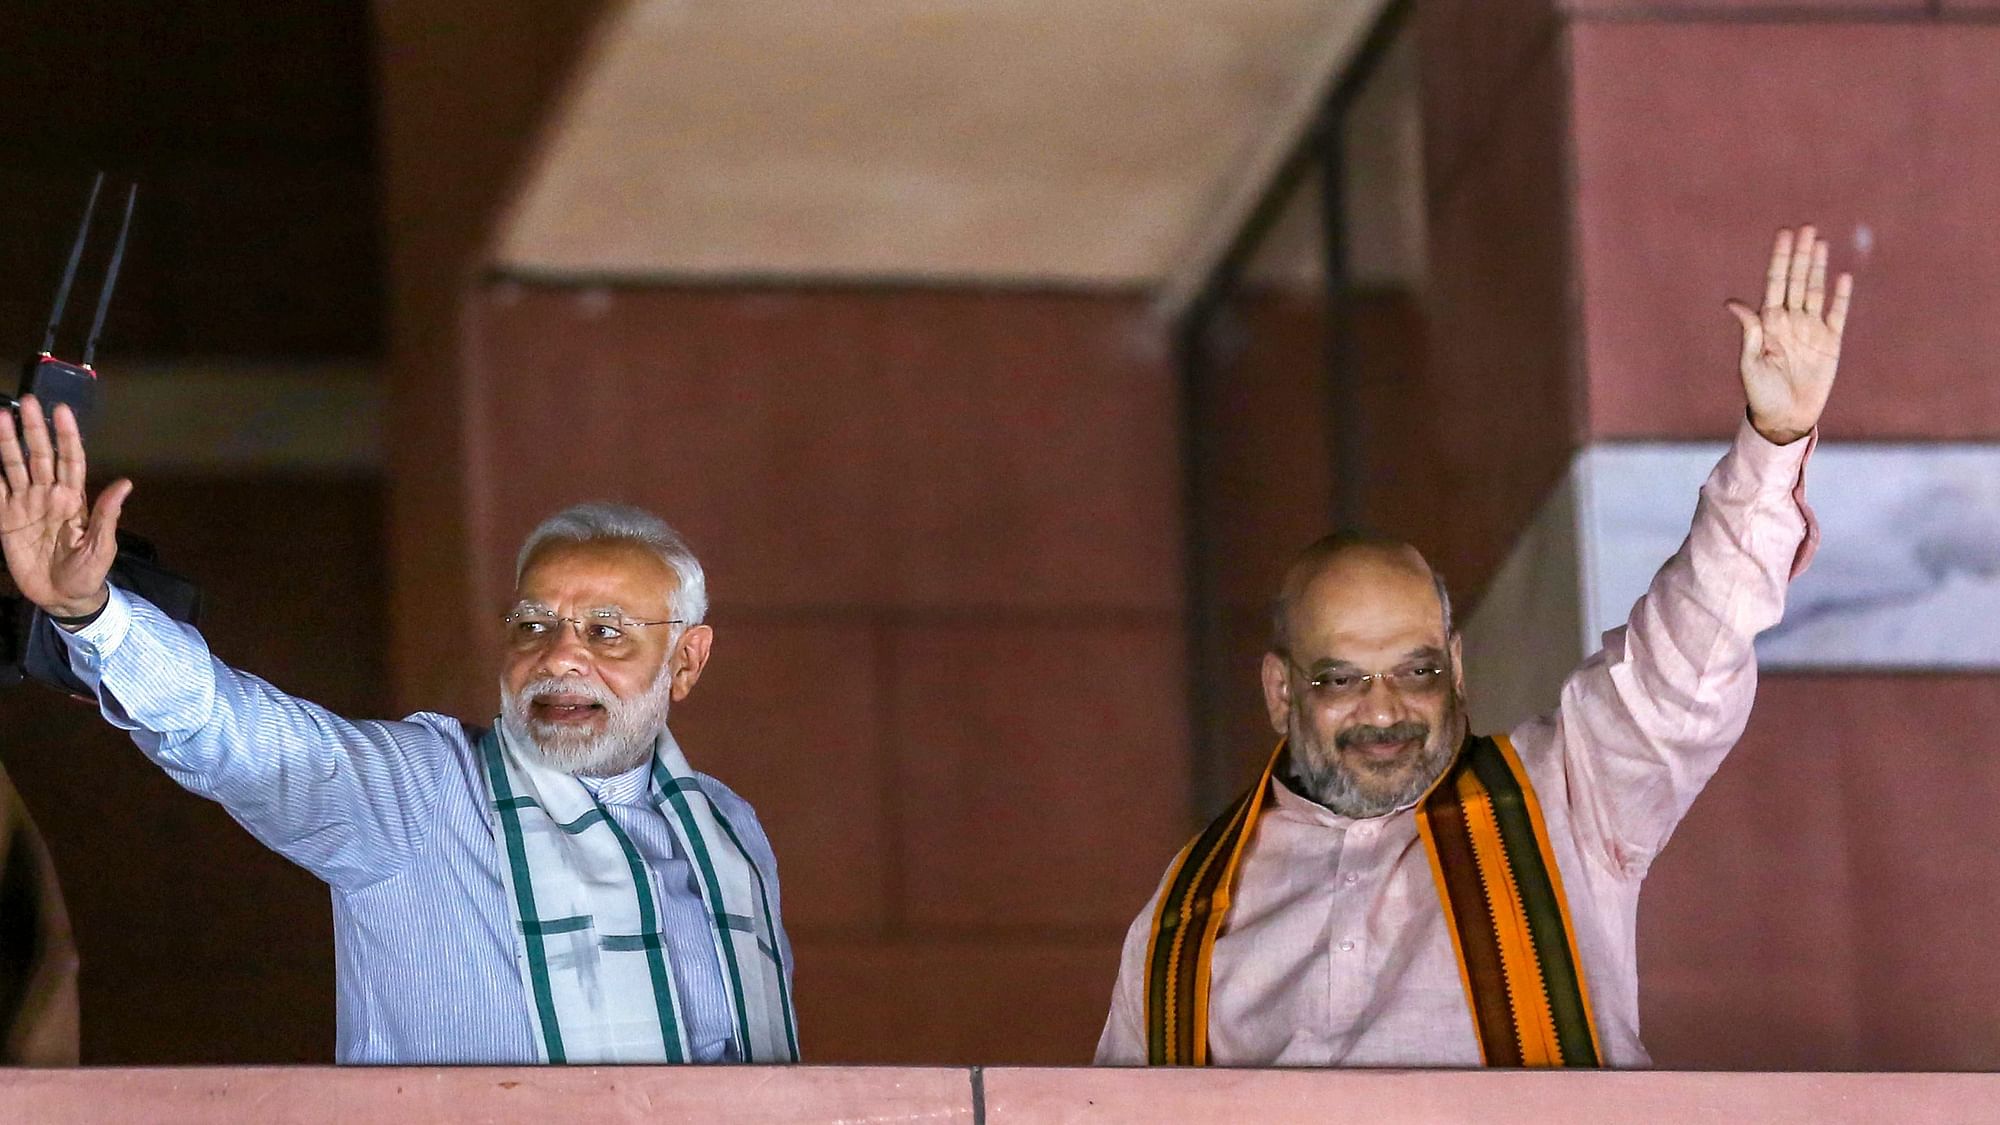 Prime Minister Narendra Modi and BJP president Amit Shah wave at party workers gathered at the BJP headquarters in New Delhi.